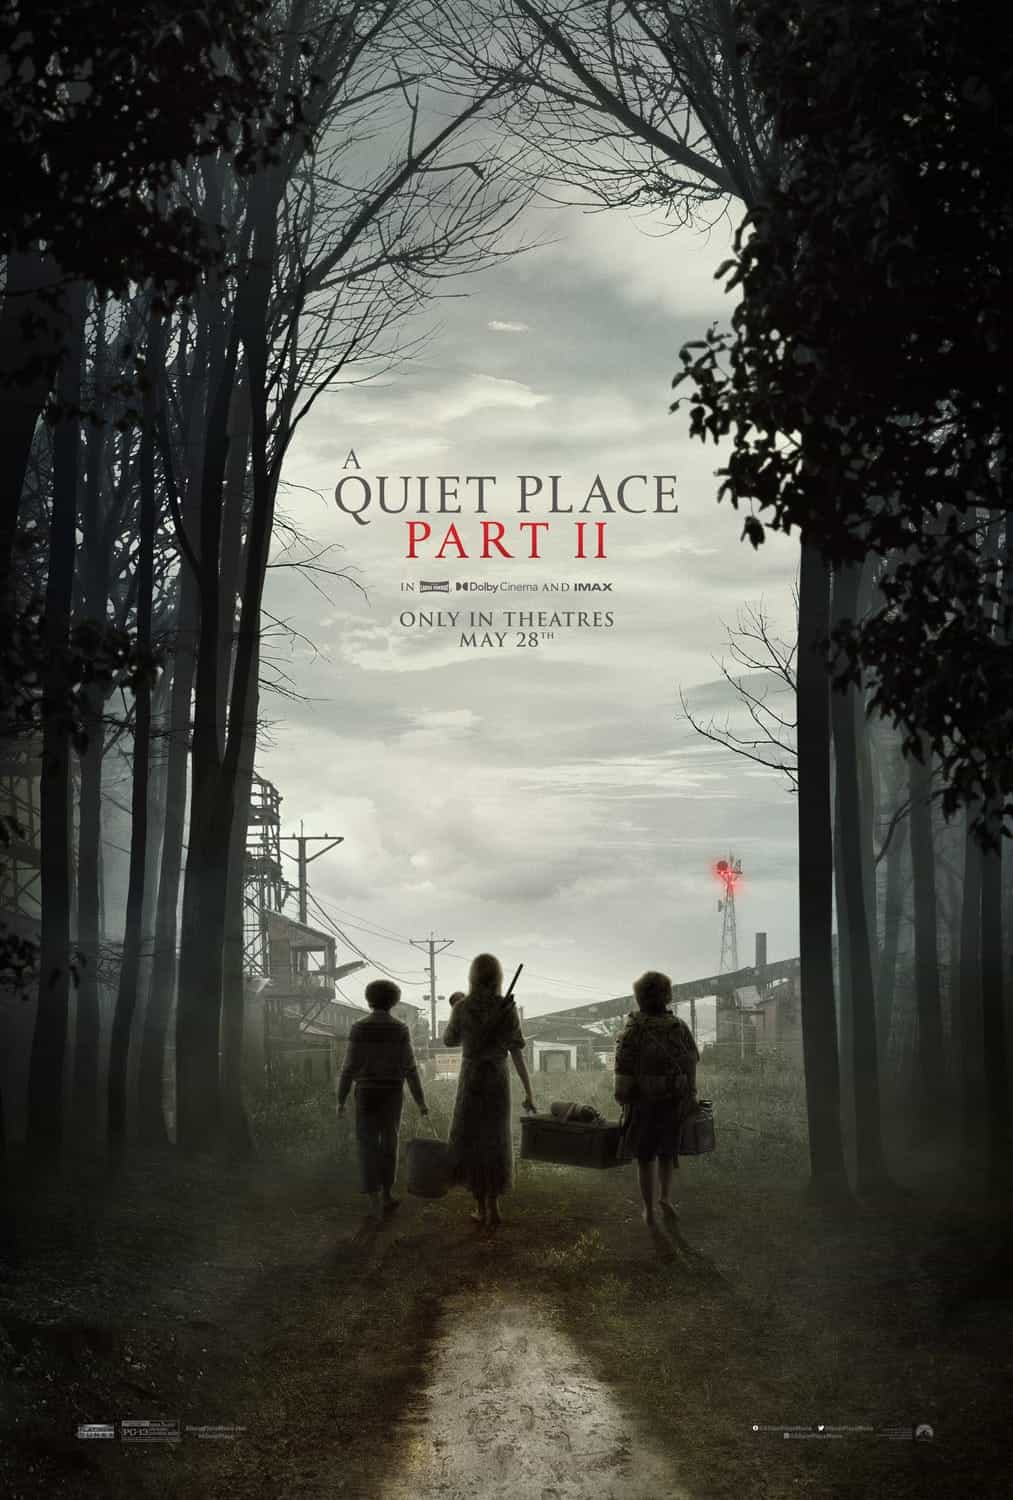 A Quiet Place Part II is given a 15 age rating for sustained threat, bloody images